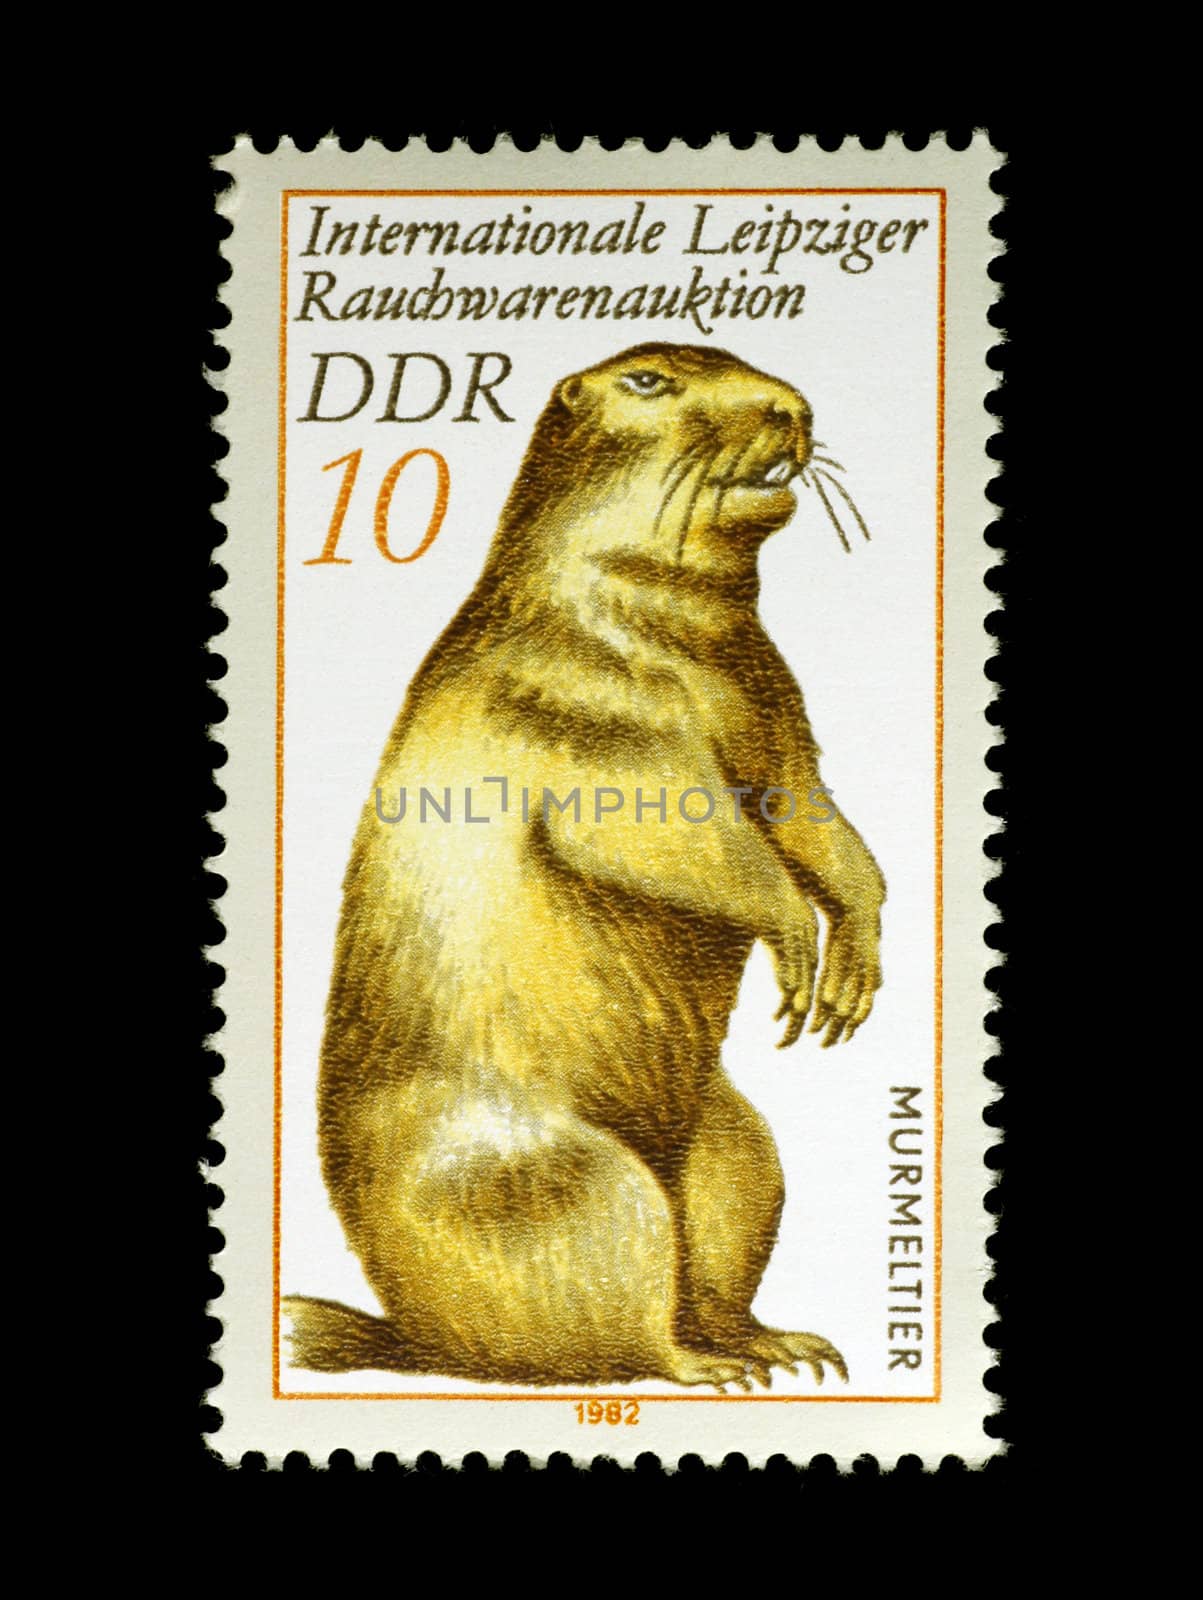 Marmot on Stamp from East Germany by Georgios